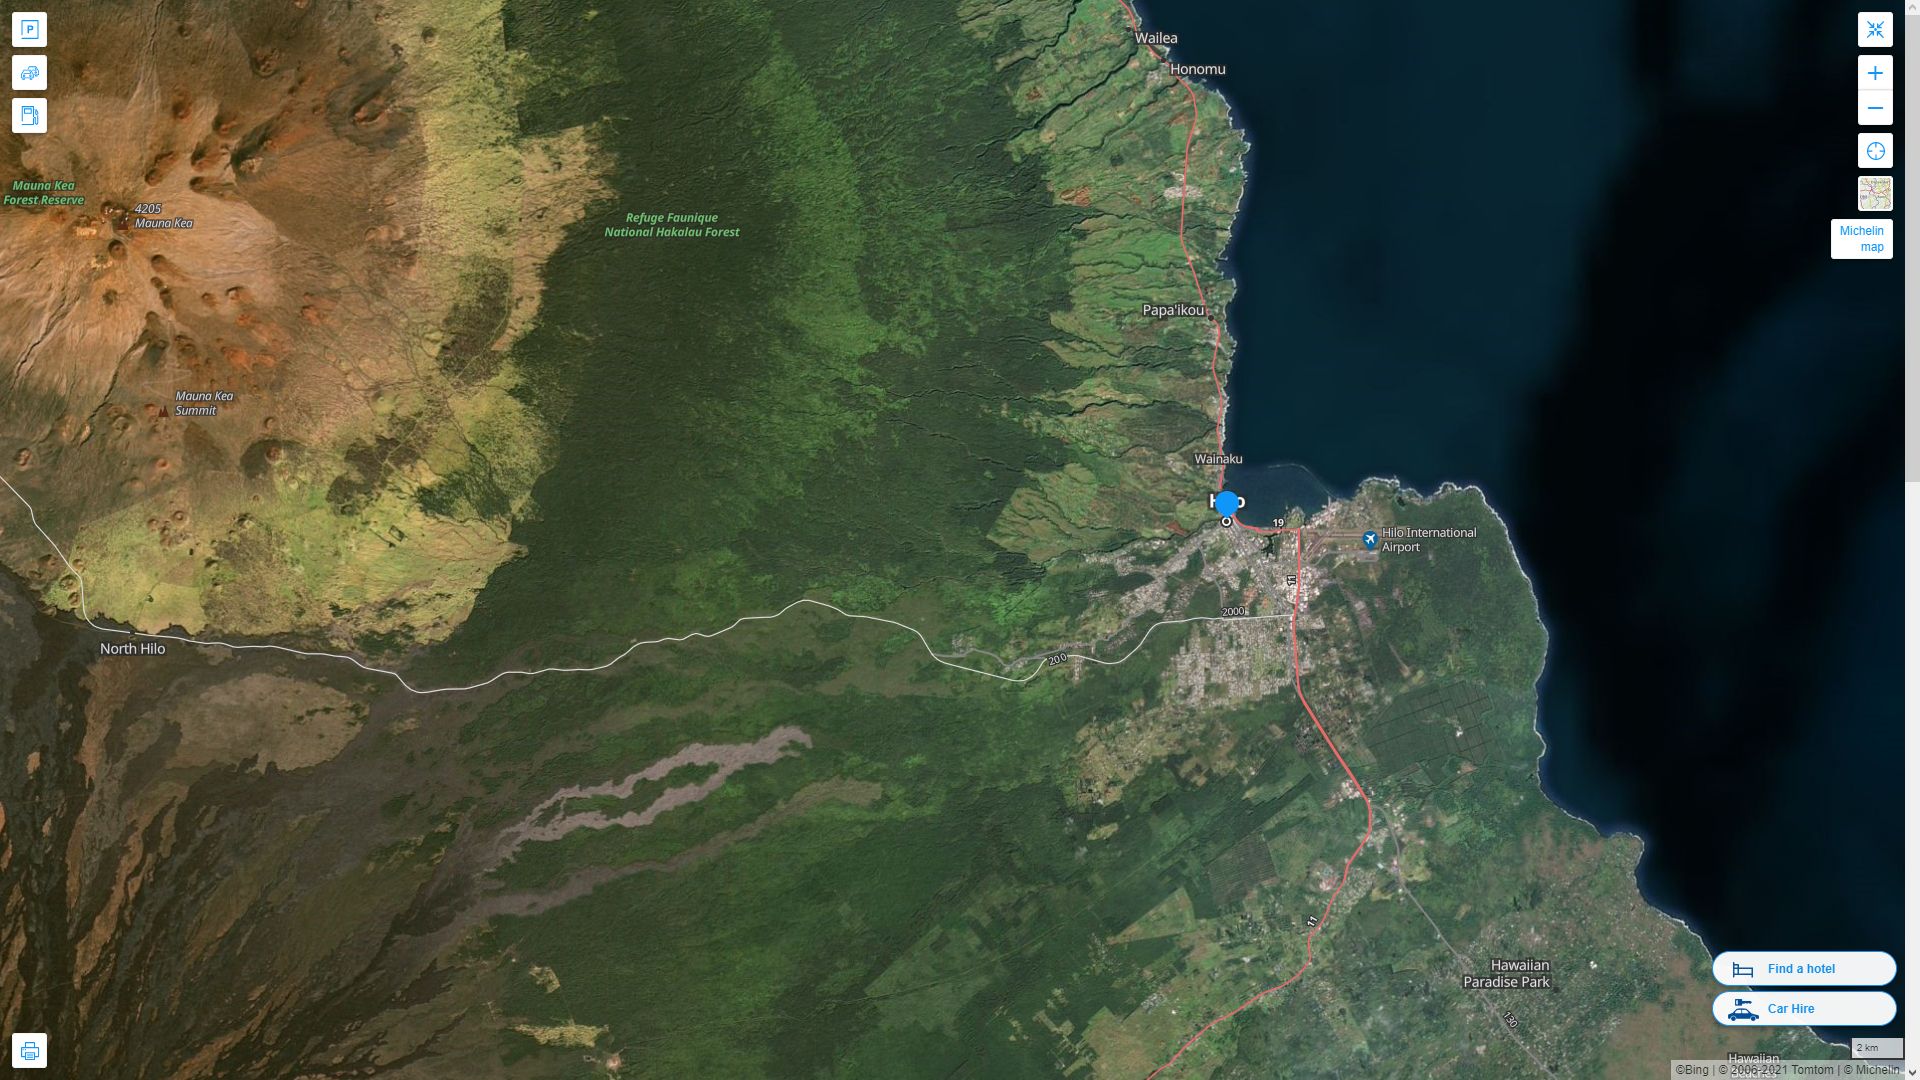 Hilo Hawaii Highway and Road Map with Satellite View